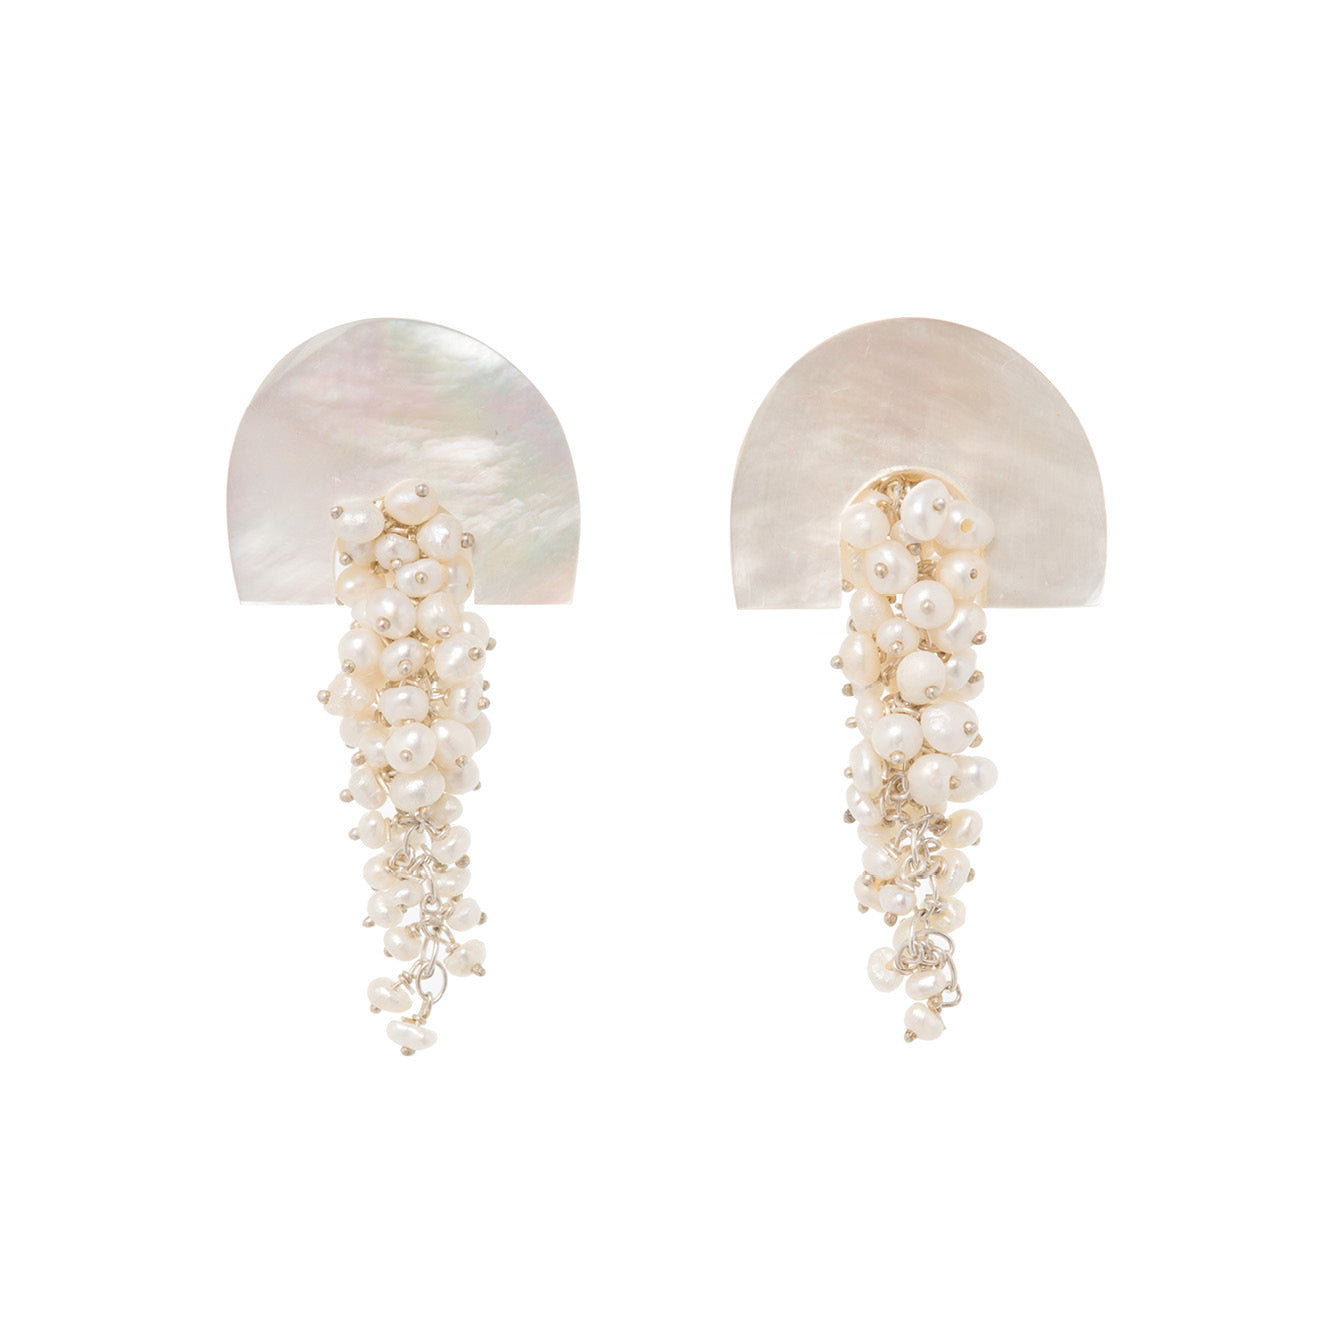 A product shot of 'Hakuro Silver Midi' A sterling silver mother of pearl and seed pearl drop earring - Freya Rose Jewellery